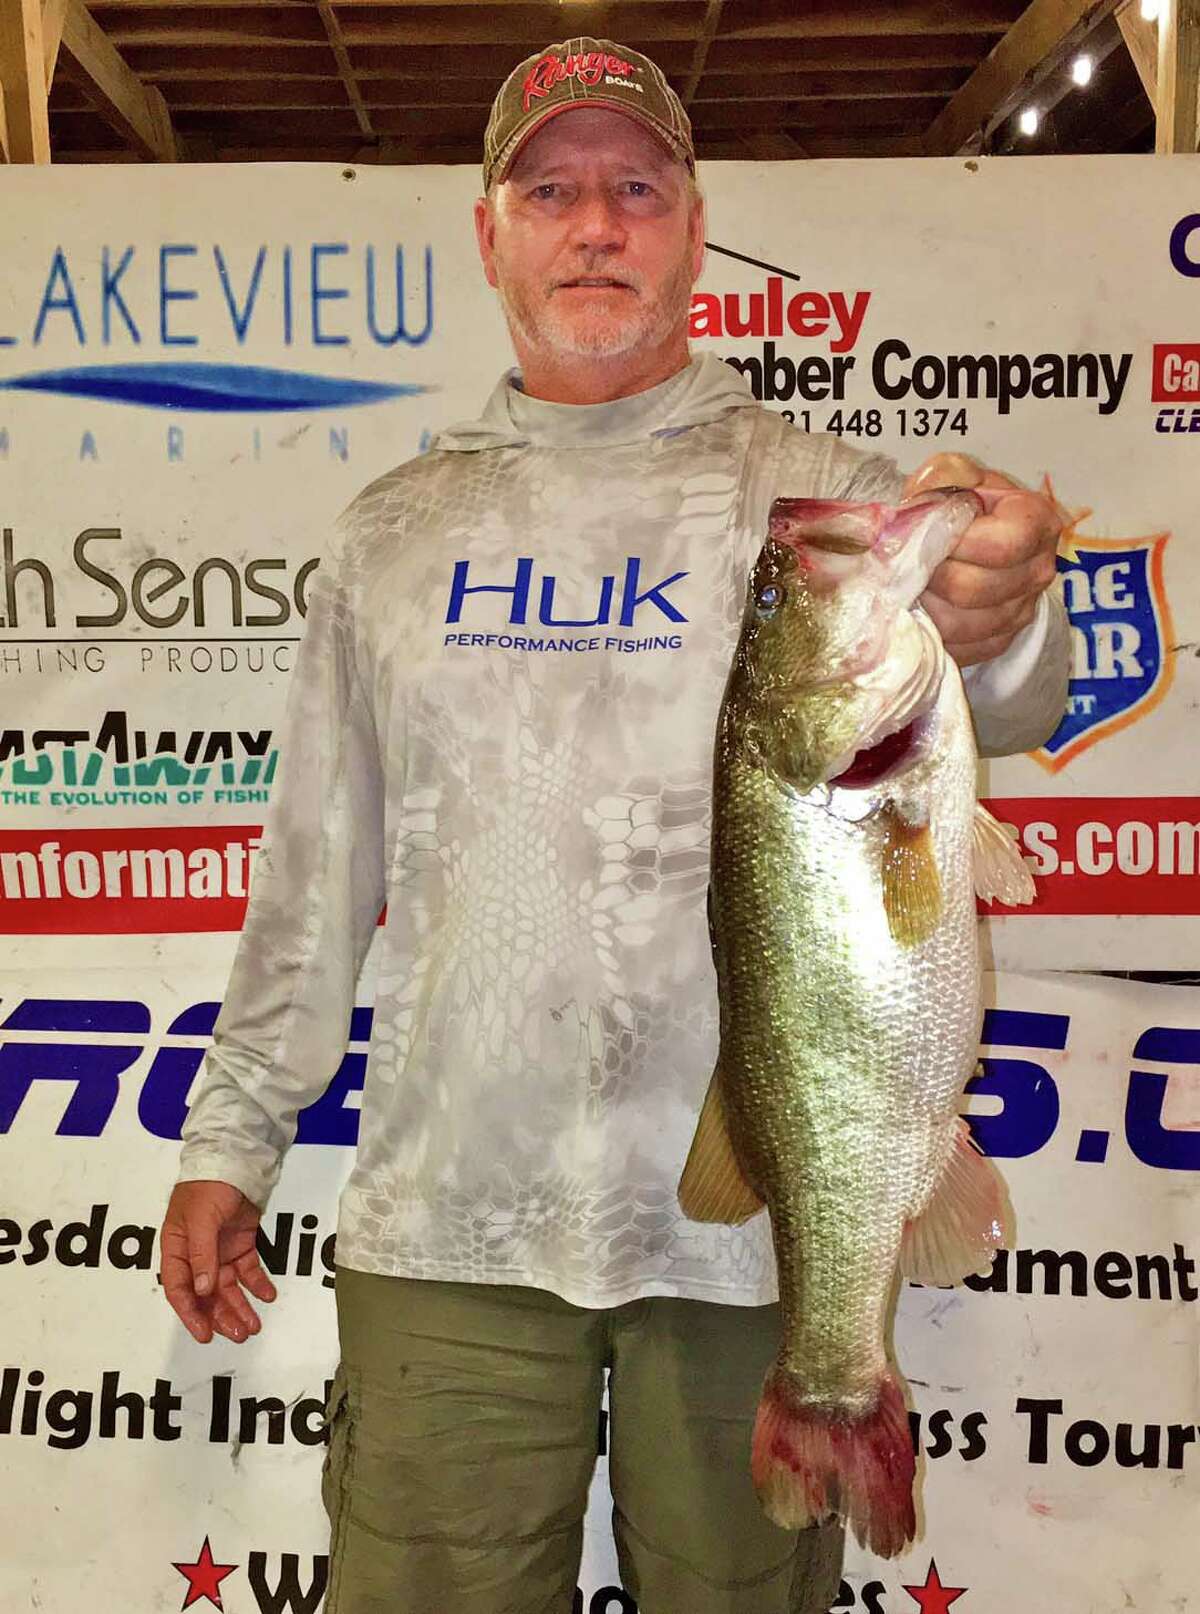 Tim Carlson came in second place in the CONROEBASS Thursday Night Big Bass Tournament with a weight of 6.67 pounds.